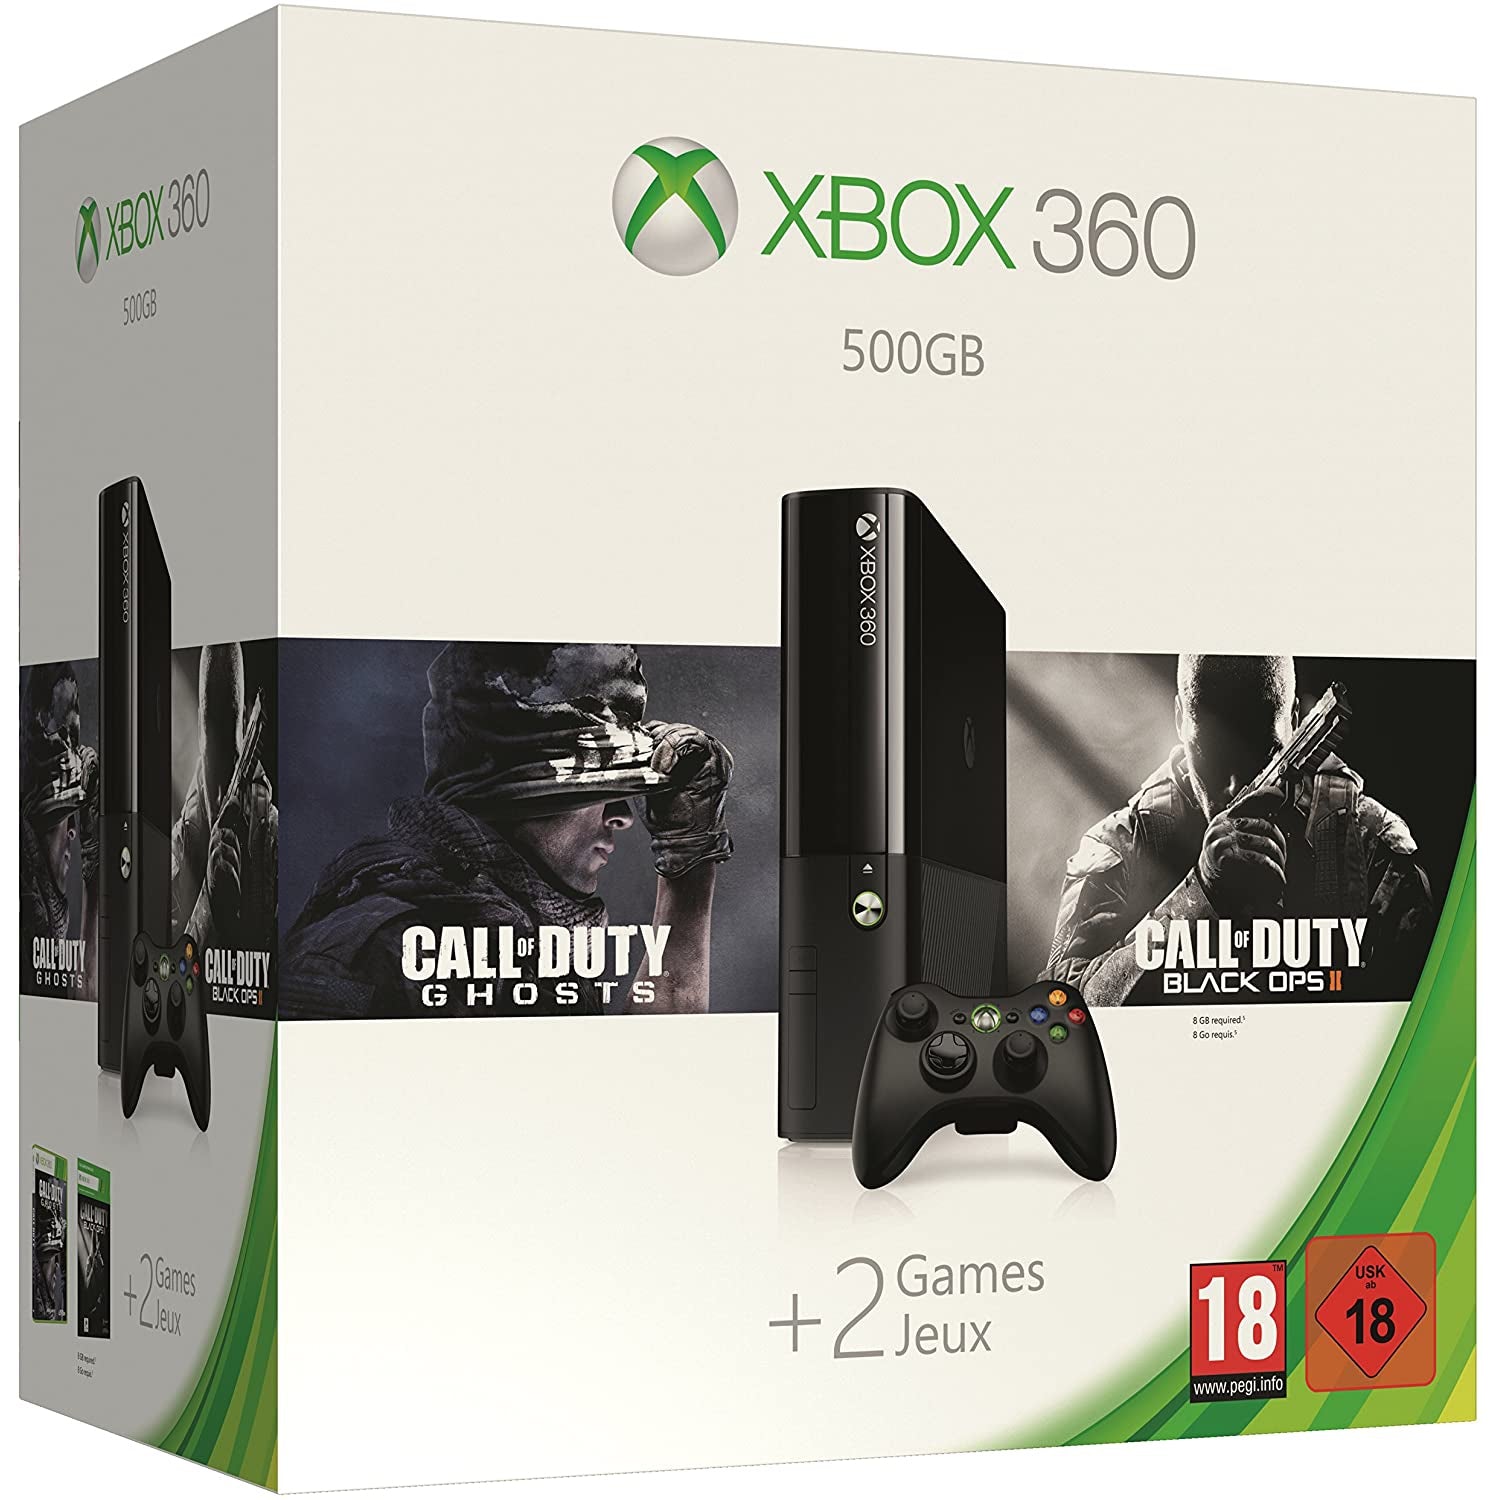 Xbox 360 Console 500GB Black + Call of Duty: Ghosts + Call of Duty: Black Ops 2